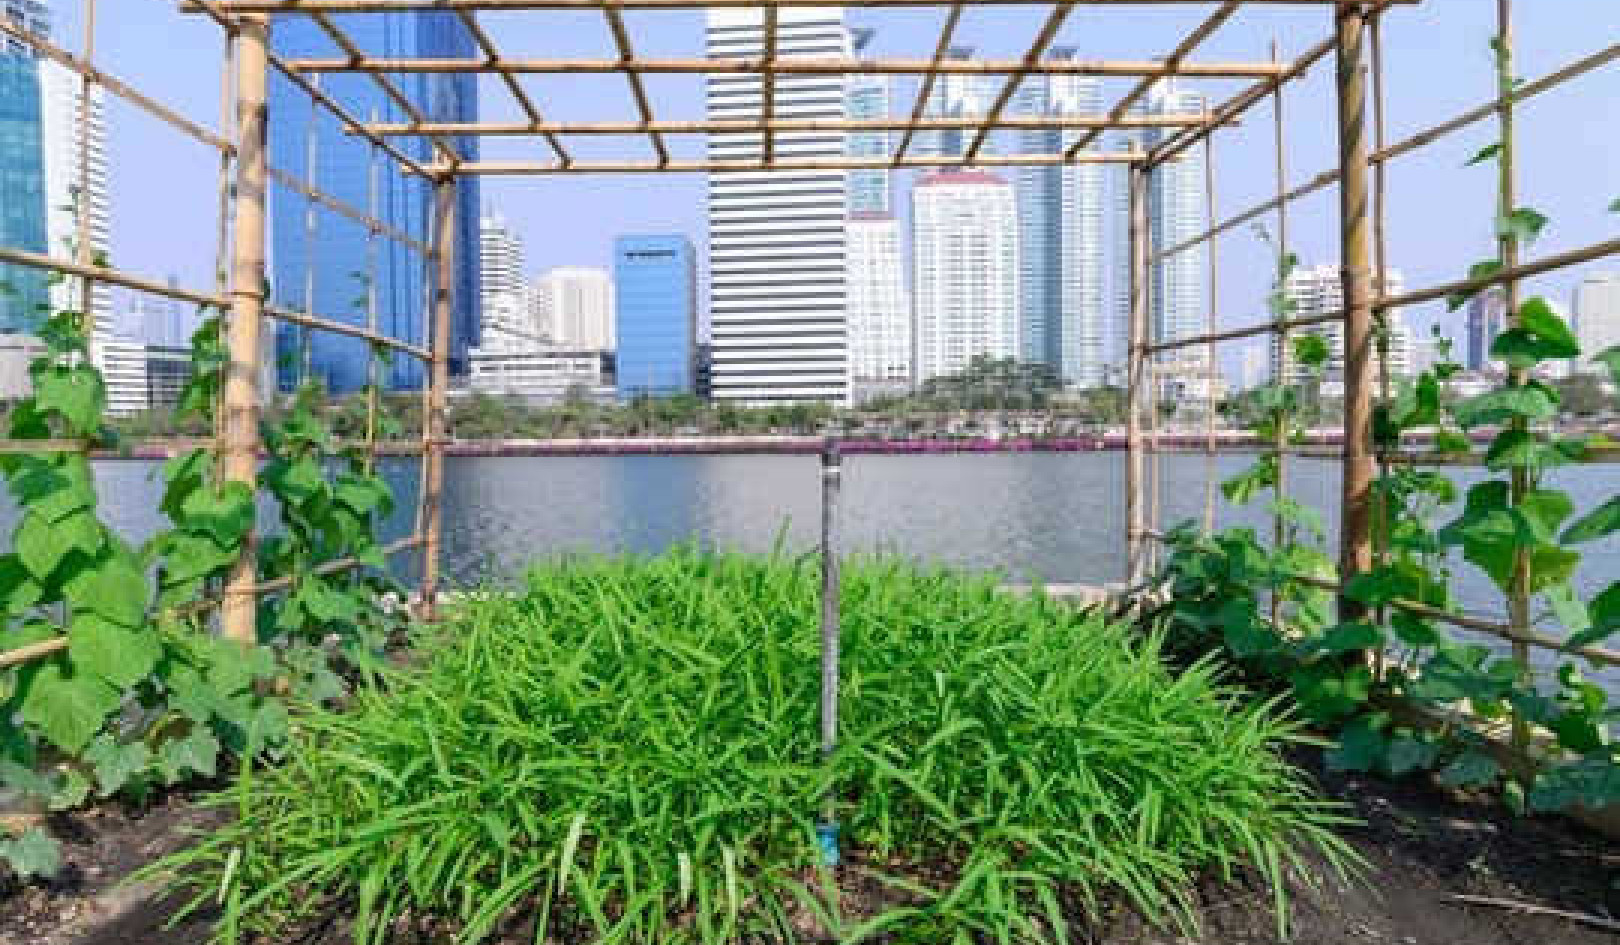 3 Ways Cities Can Help Feed The World